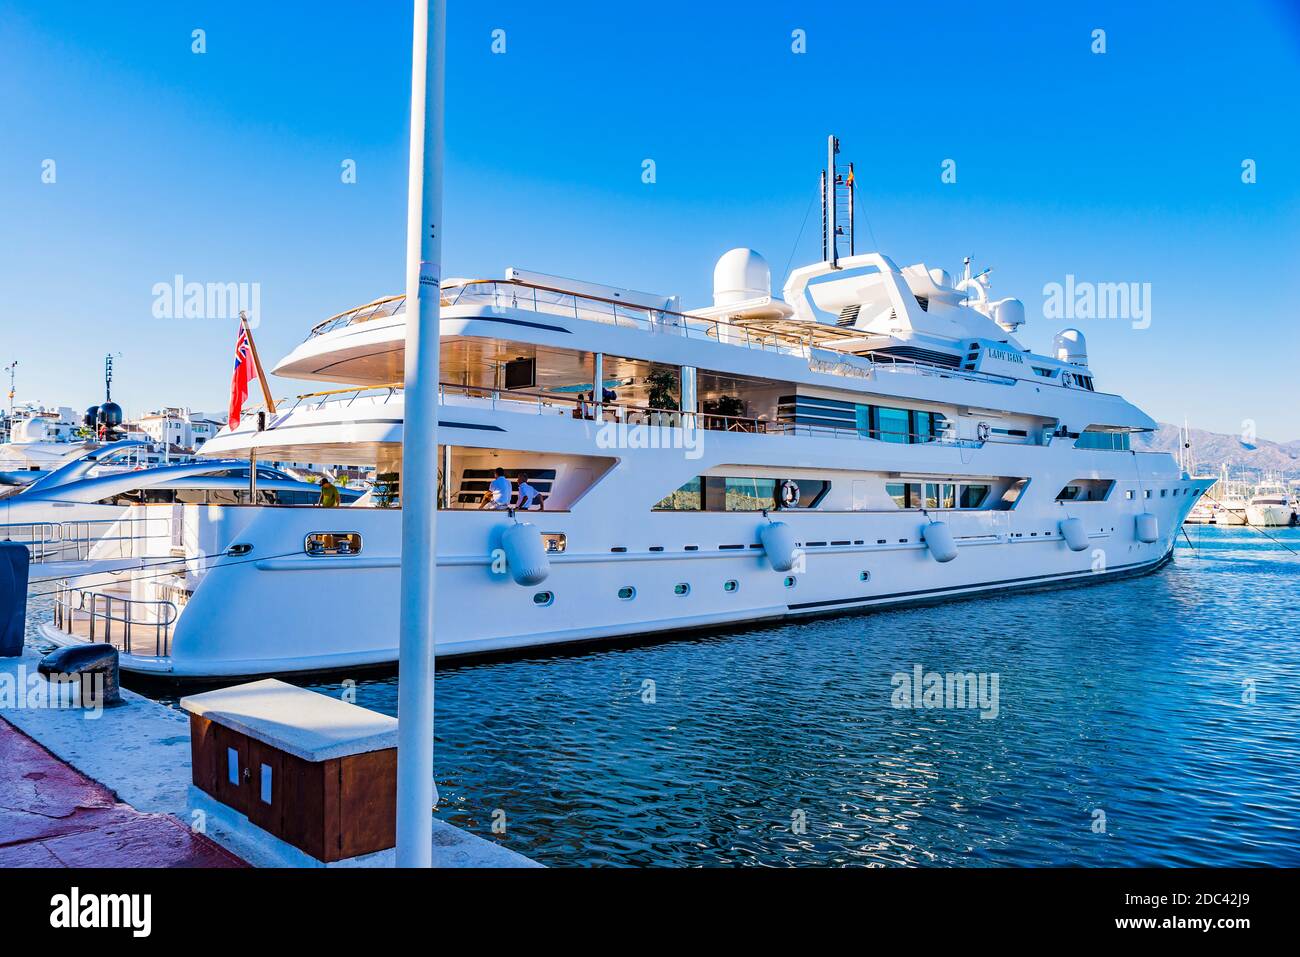 Lady Haya, an impressive 64-meter-long vessel, which belonged to the late King Fahd and is currently from the Saudi royal family. The Yacht Harbour of Stock Photo